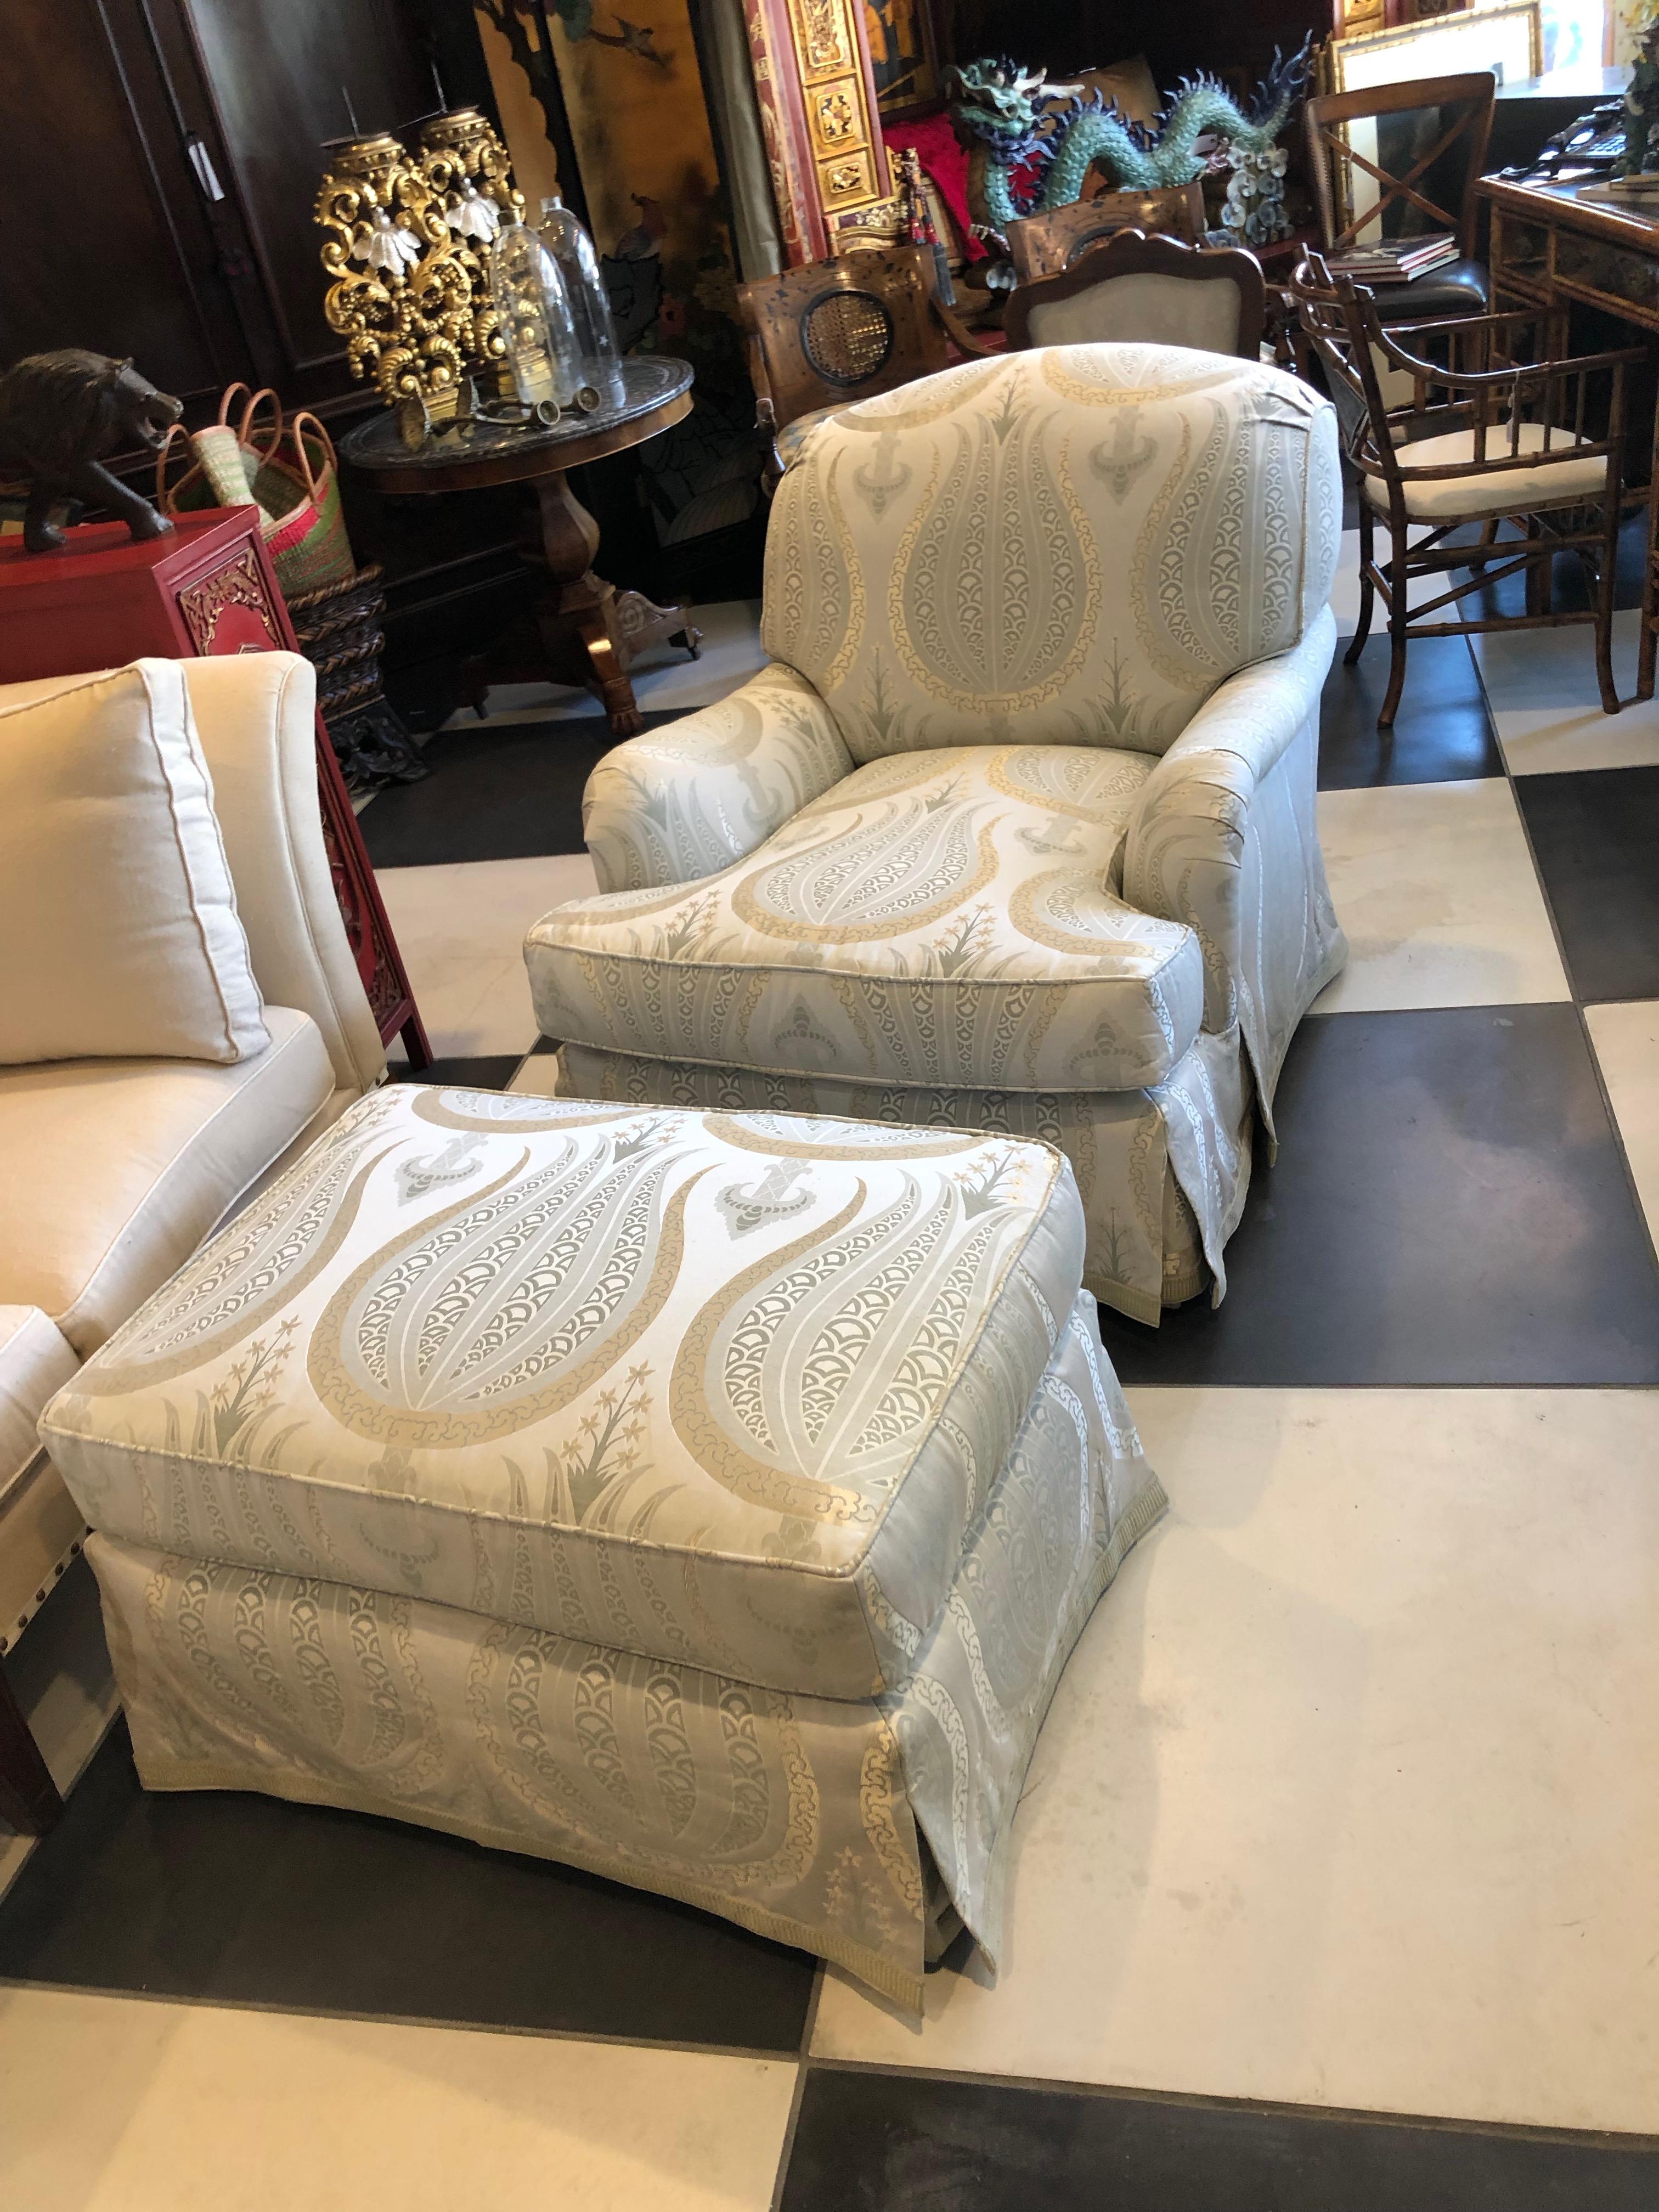 This Jonas armchair and ottoman is upholstered in Anna French fabric extra large and comfortable Rounded back at top not a spot or mark on it!